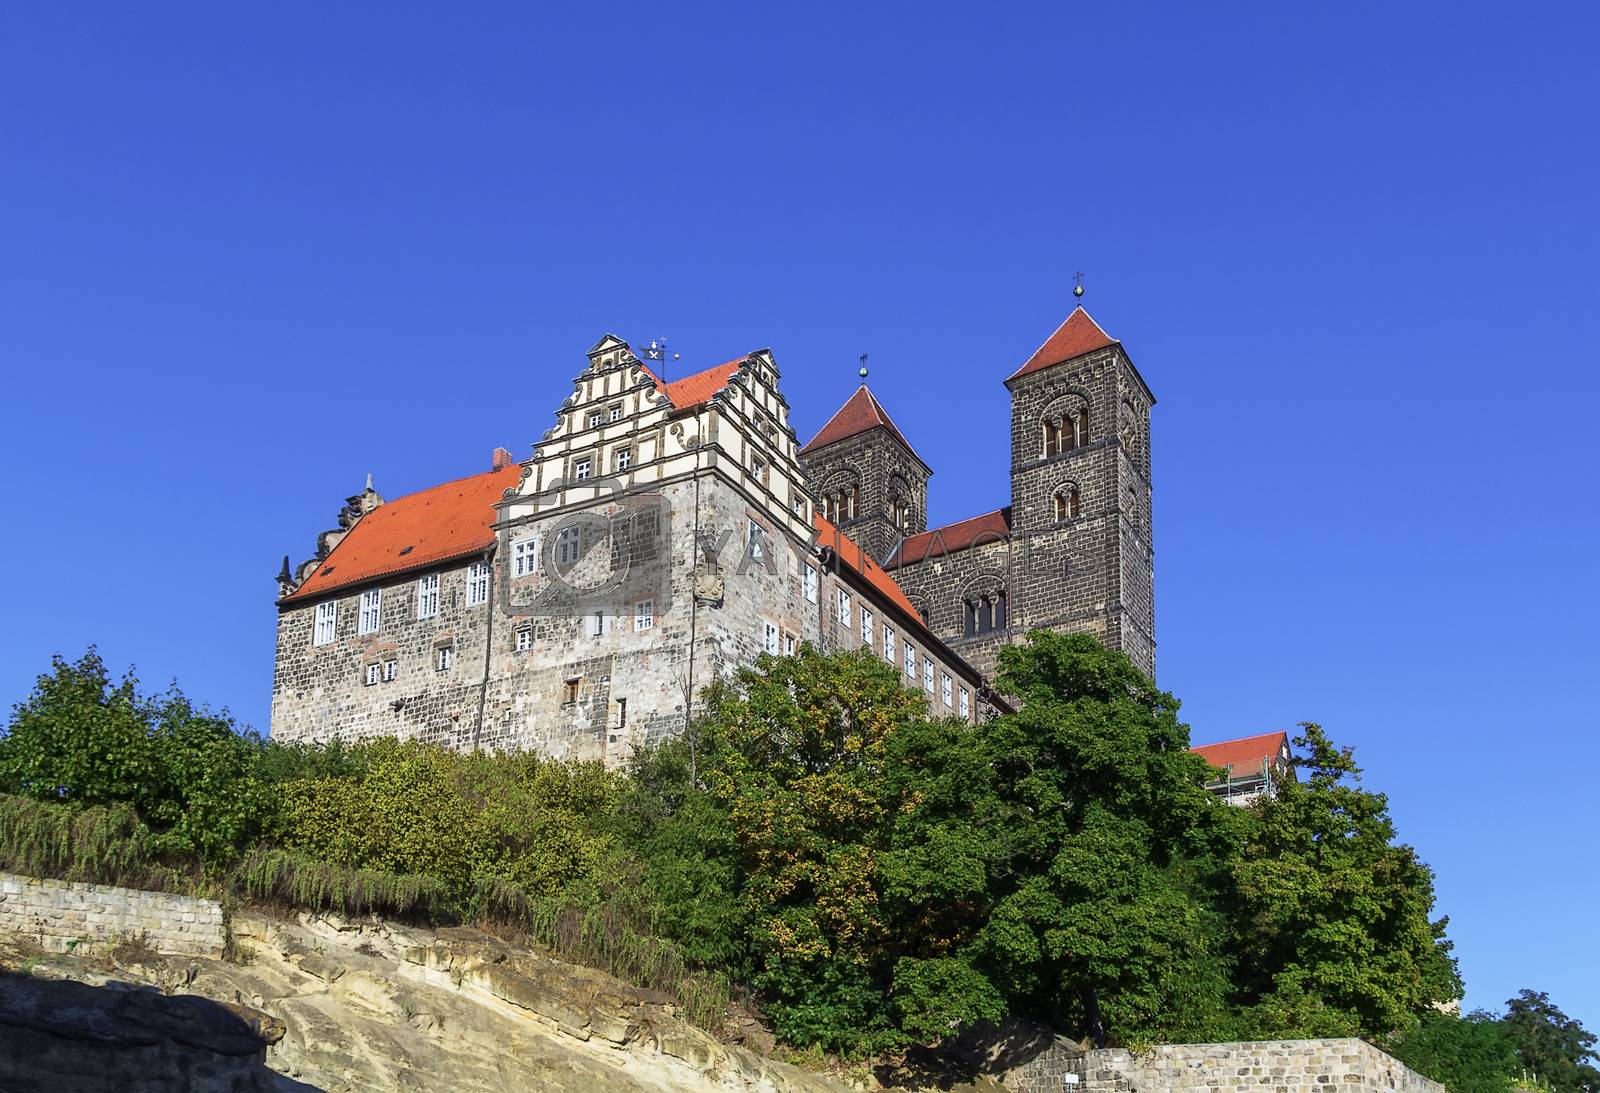 Royalty free image of The castle and church, Quedlinburg, Germany by borisb17